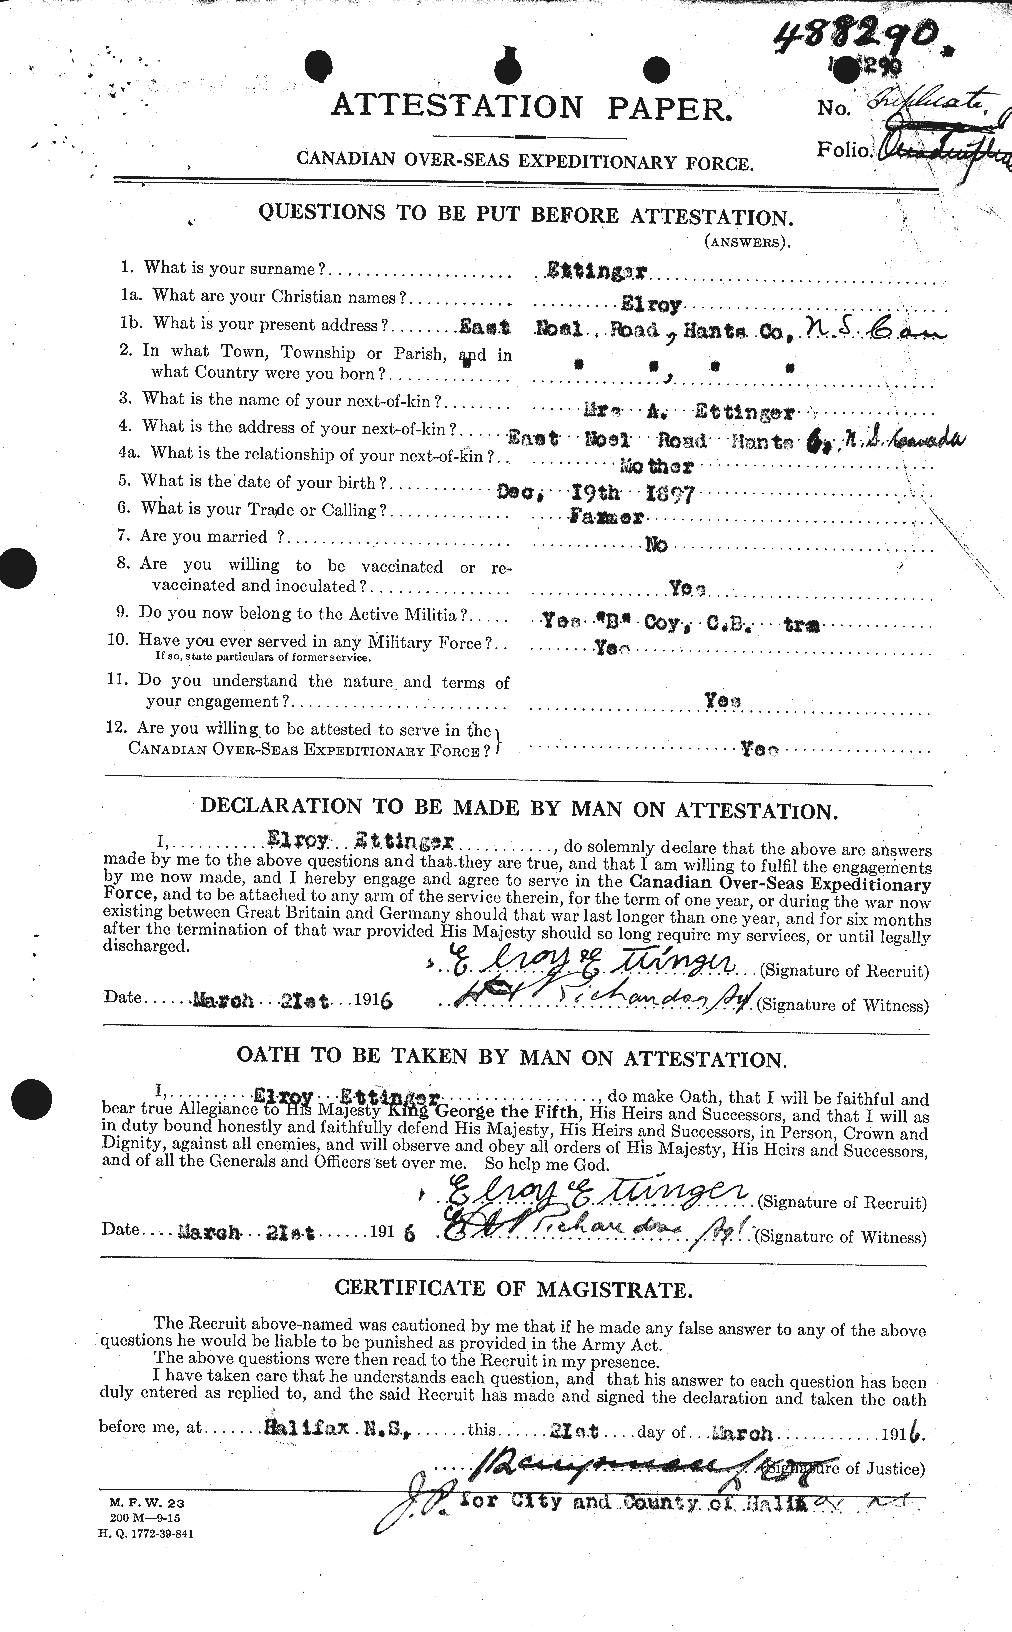 Personnel Records of the First World War - CEF 314763a